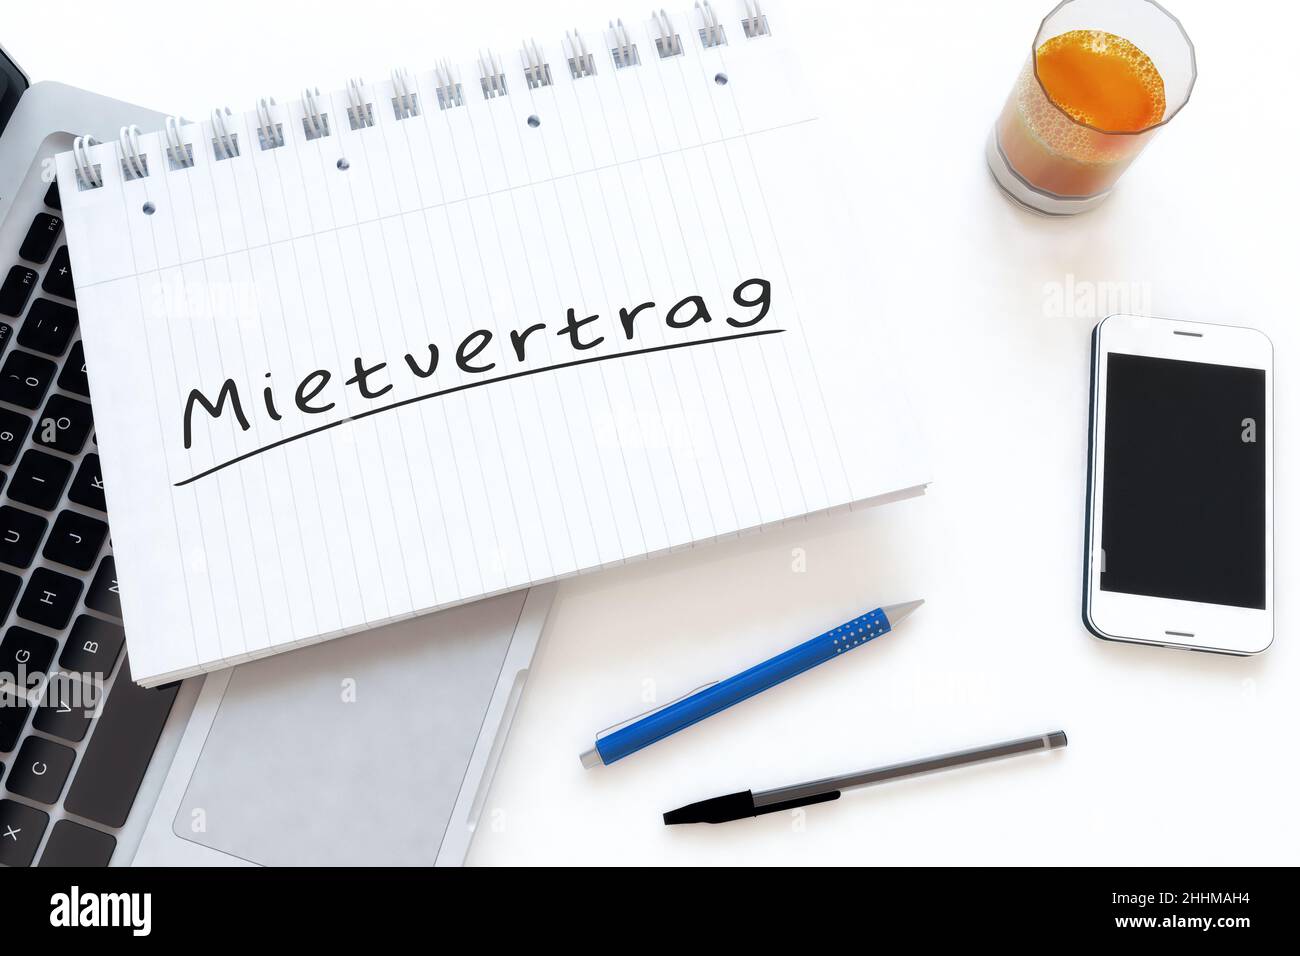 Mietvertrag - german word for rent contract or lease agreement - handwritten text in a notebook on a desk - 3d render illustration. Stock Photo